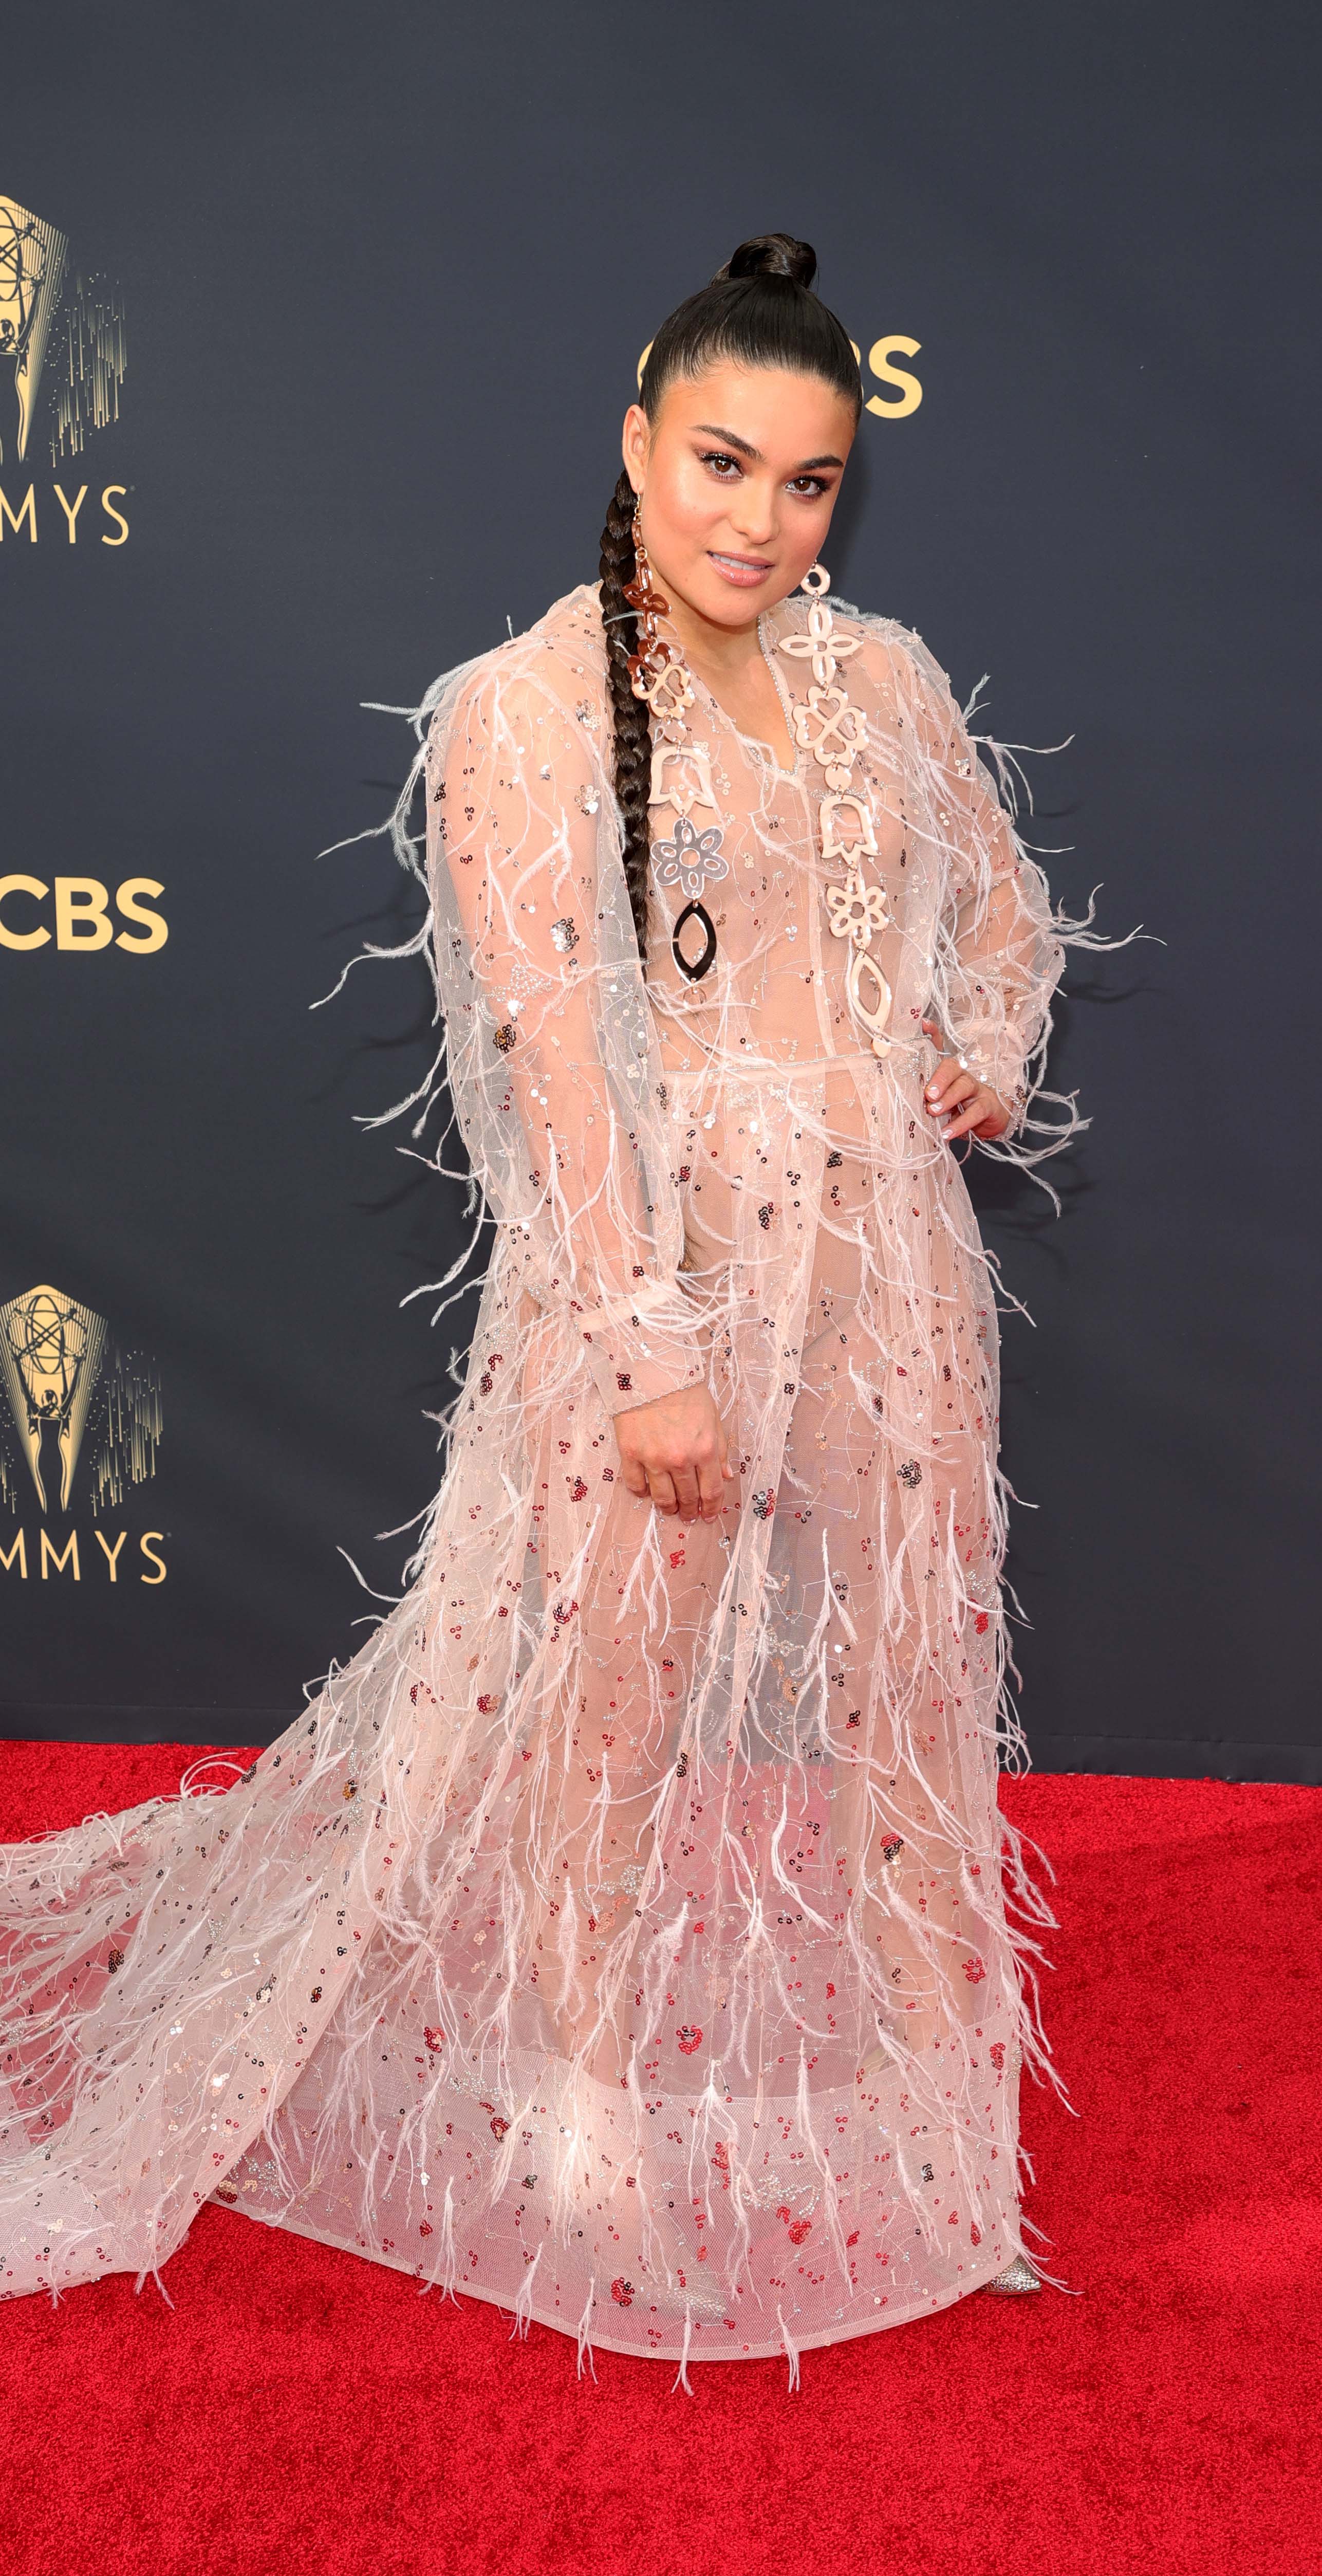 The High-Slit Dress Trend At The 2021 Emmys Dominated The Red Carpet